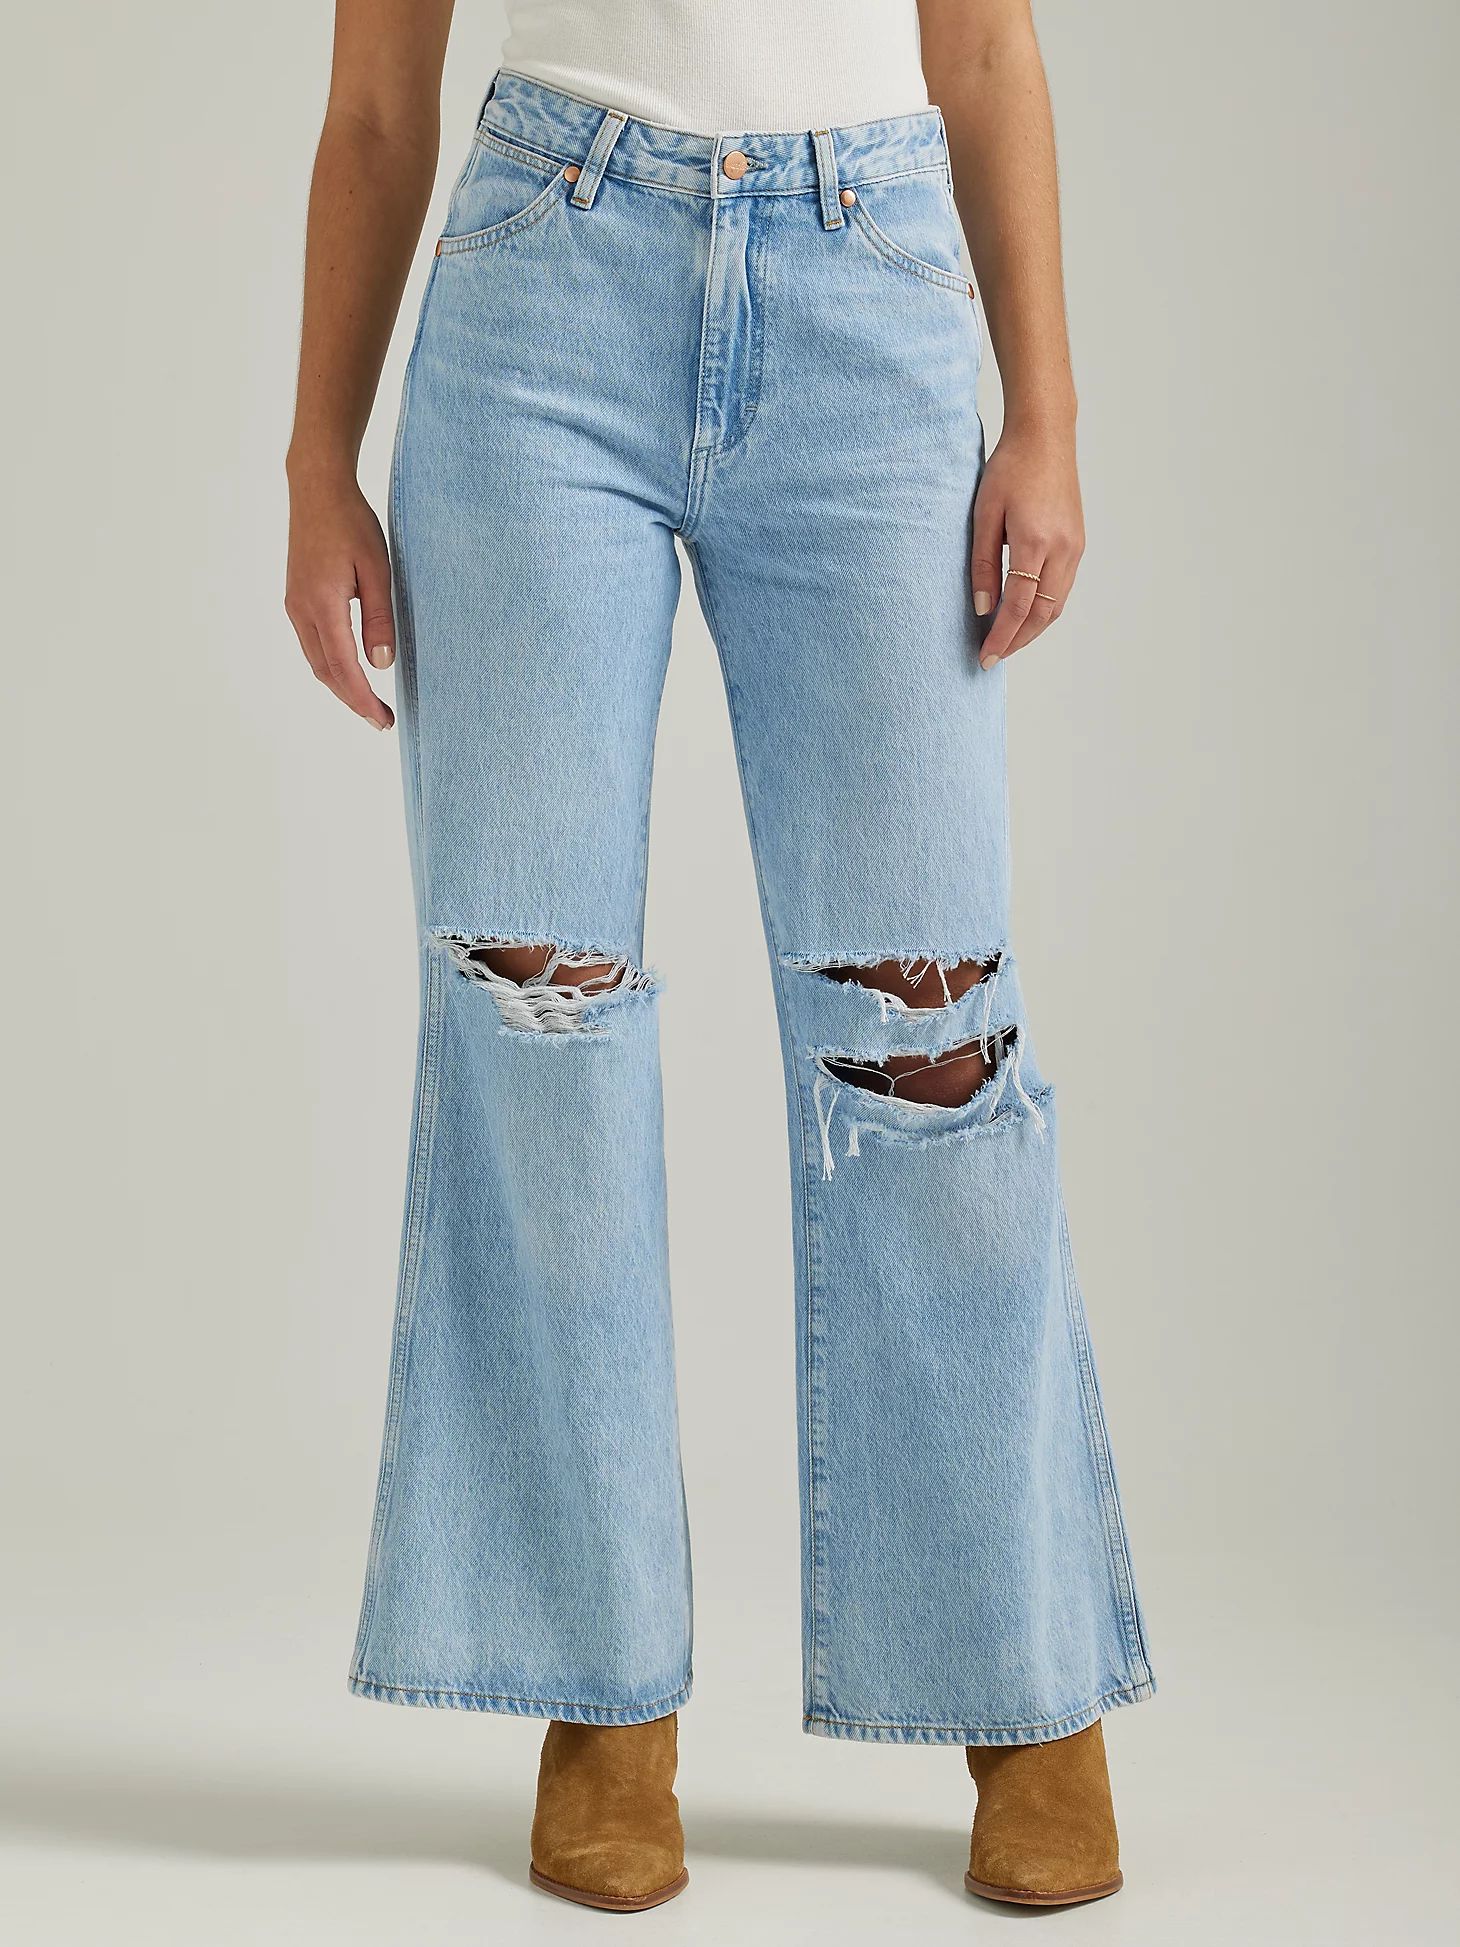 Women's Bonnie Destructed Loose Flare Jean in Bad Intentions | Wrangler